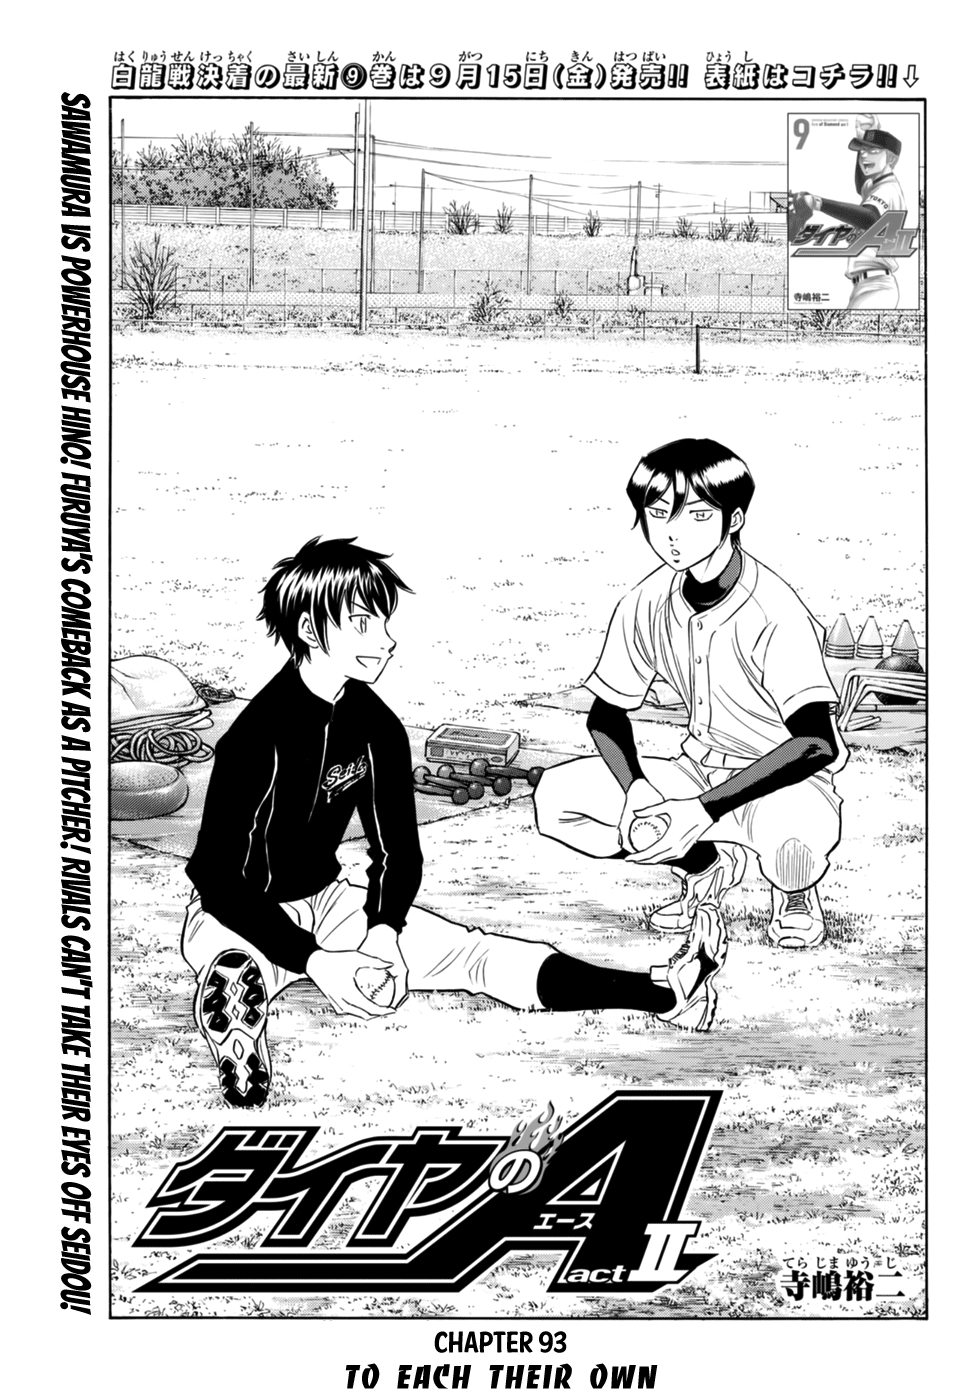 Diamond no Ace Act II Vol. 10 Ch. 93 To Each Their Own